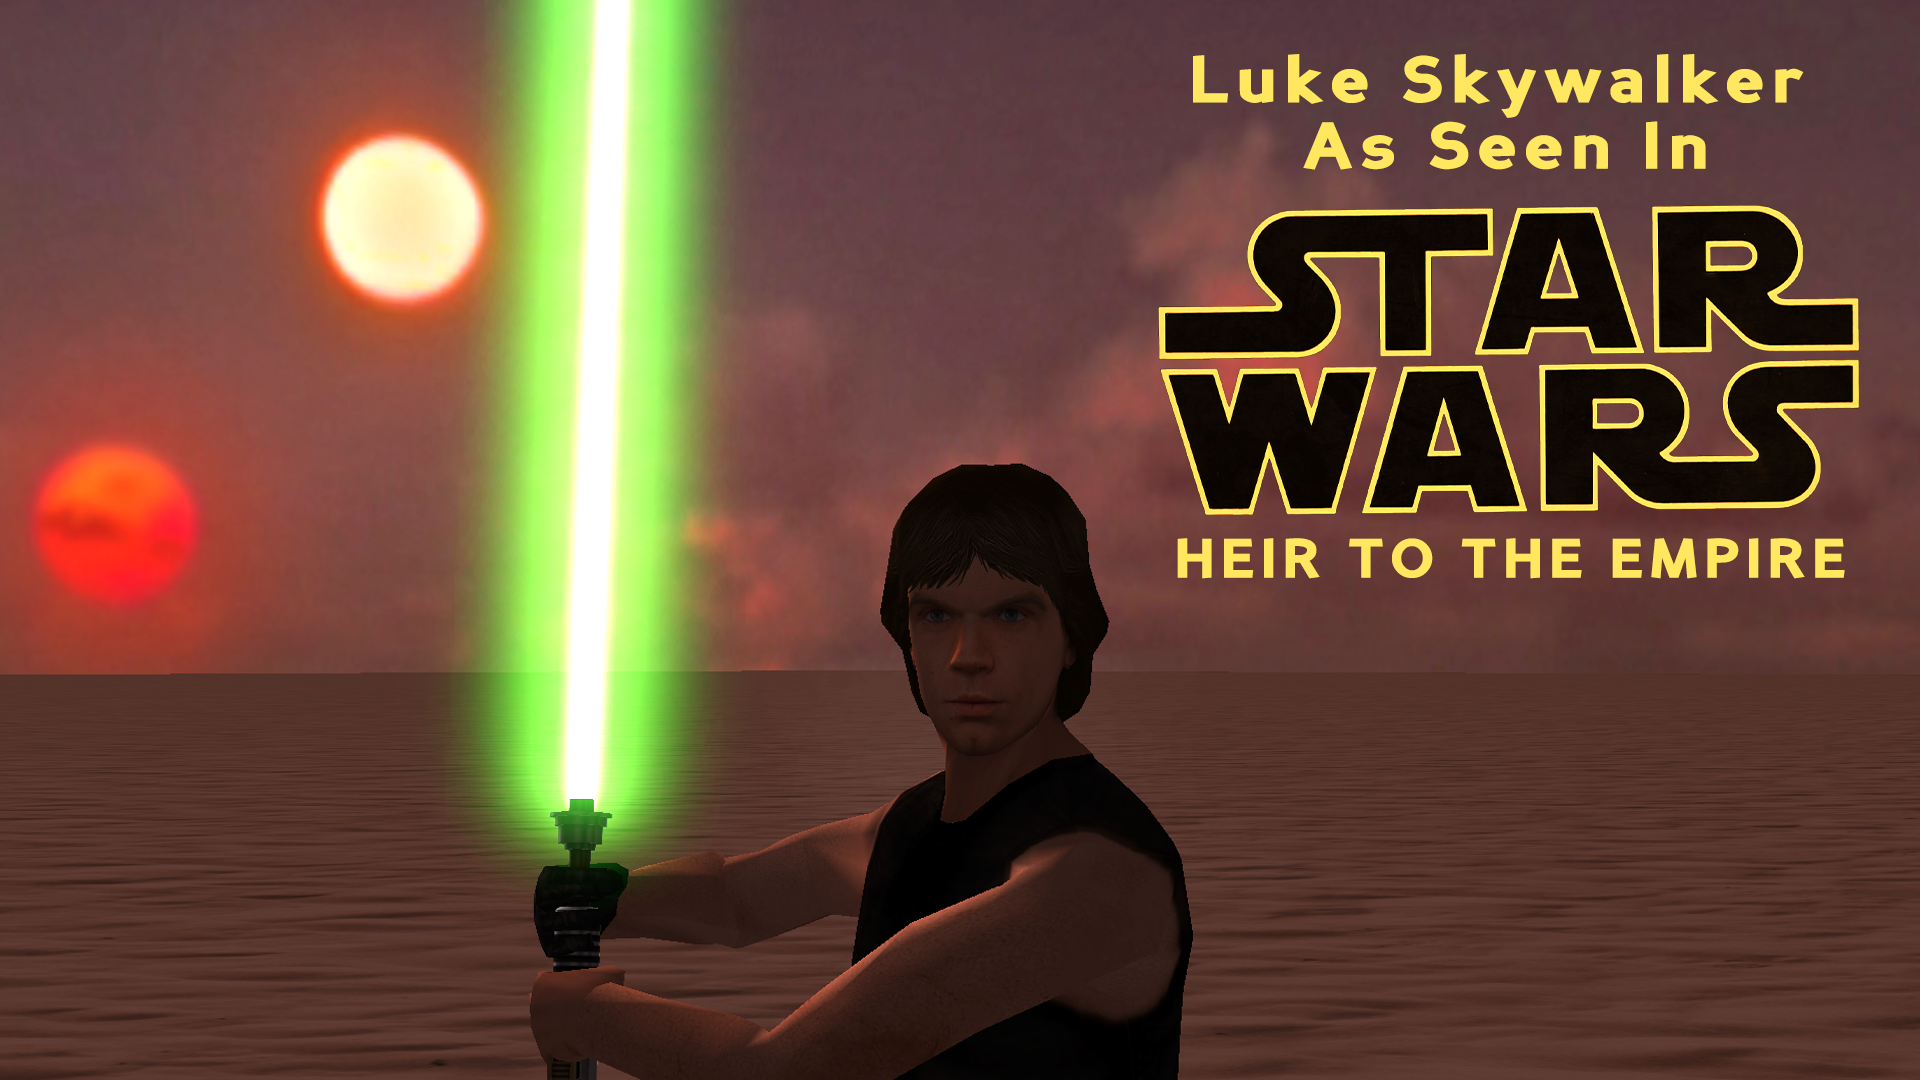 More information about "Luke Skywalker (Heir To The Empire)"